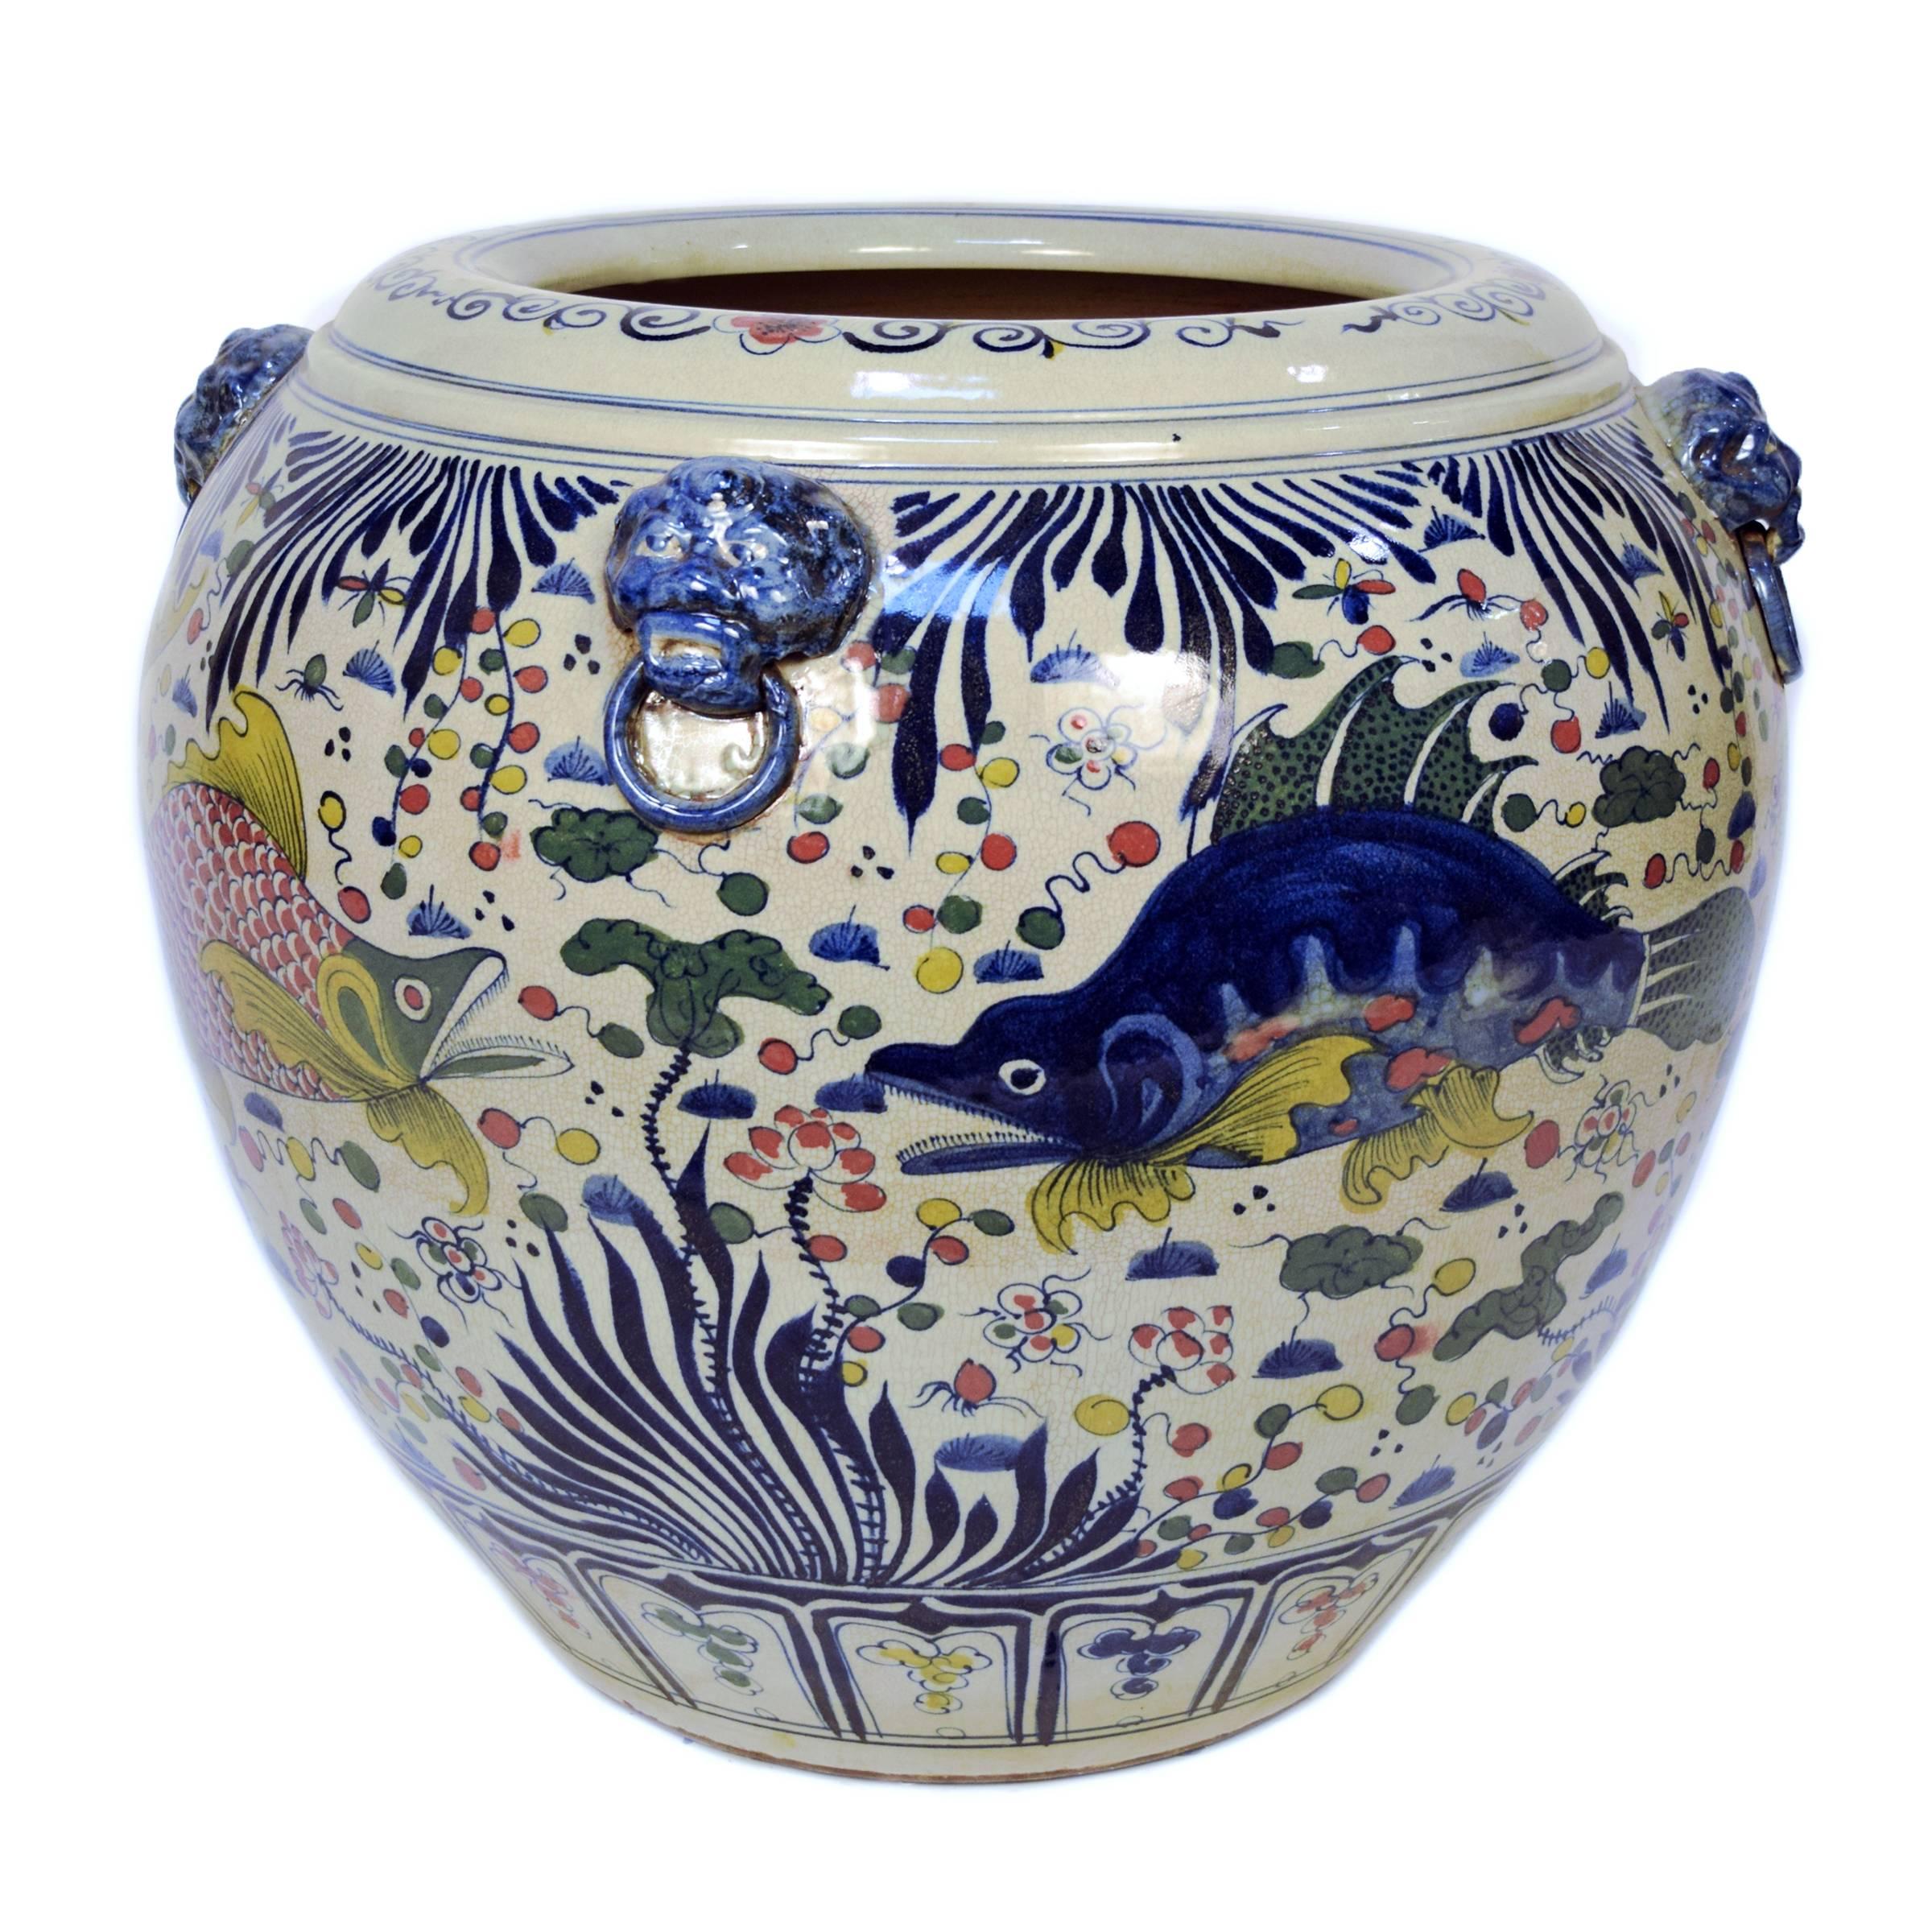 Traditional Chinese homes featured large ceramic fish ponds as both decoration and talisman of prosperity. The fish within combine with the aquatic motifs depicted on the exterior in 